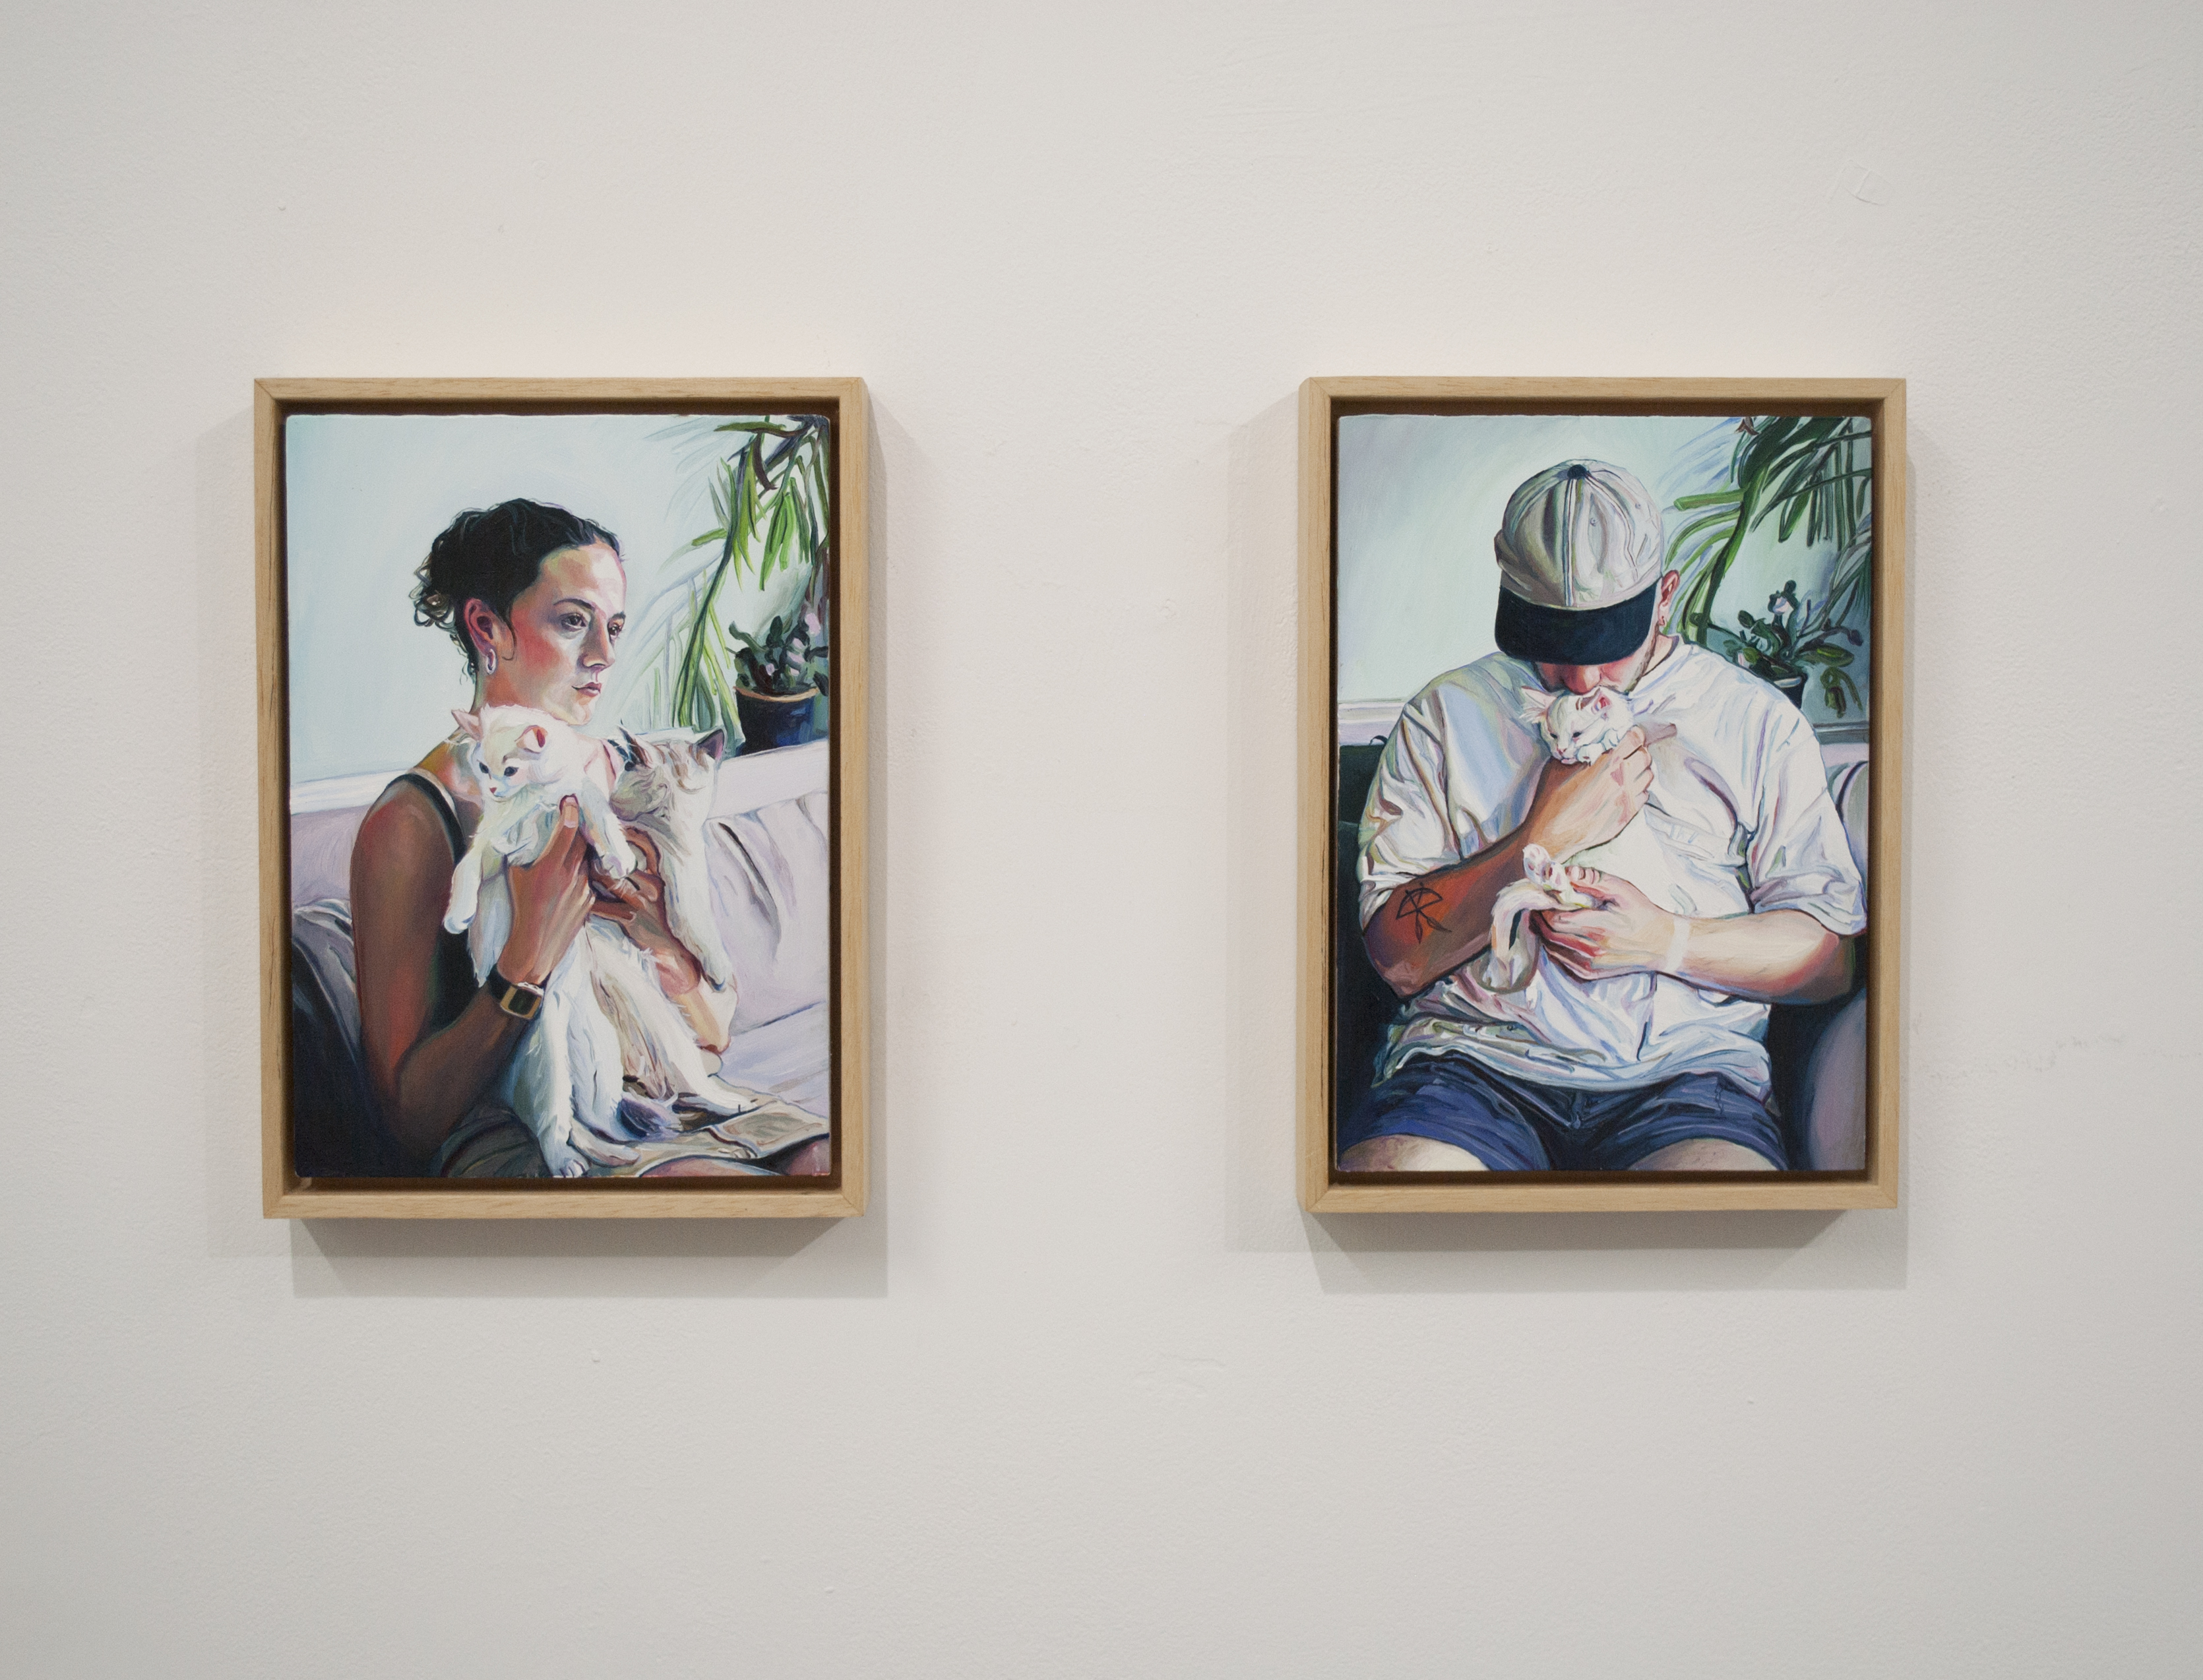 David's Kittens and Boy with Kitten (installation view)